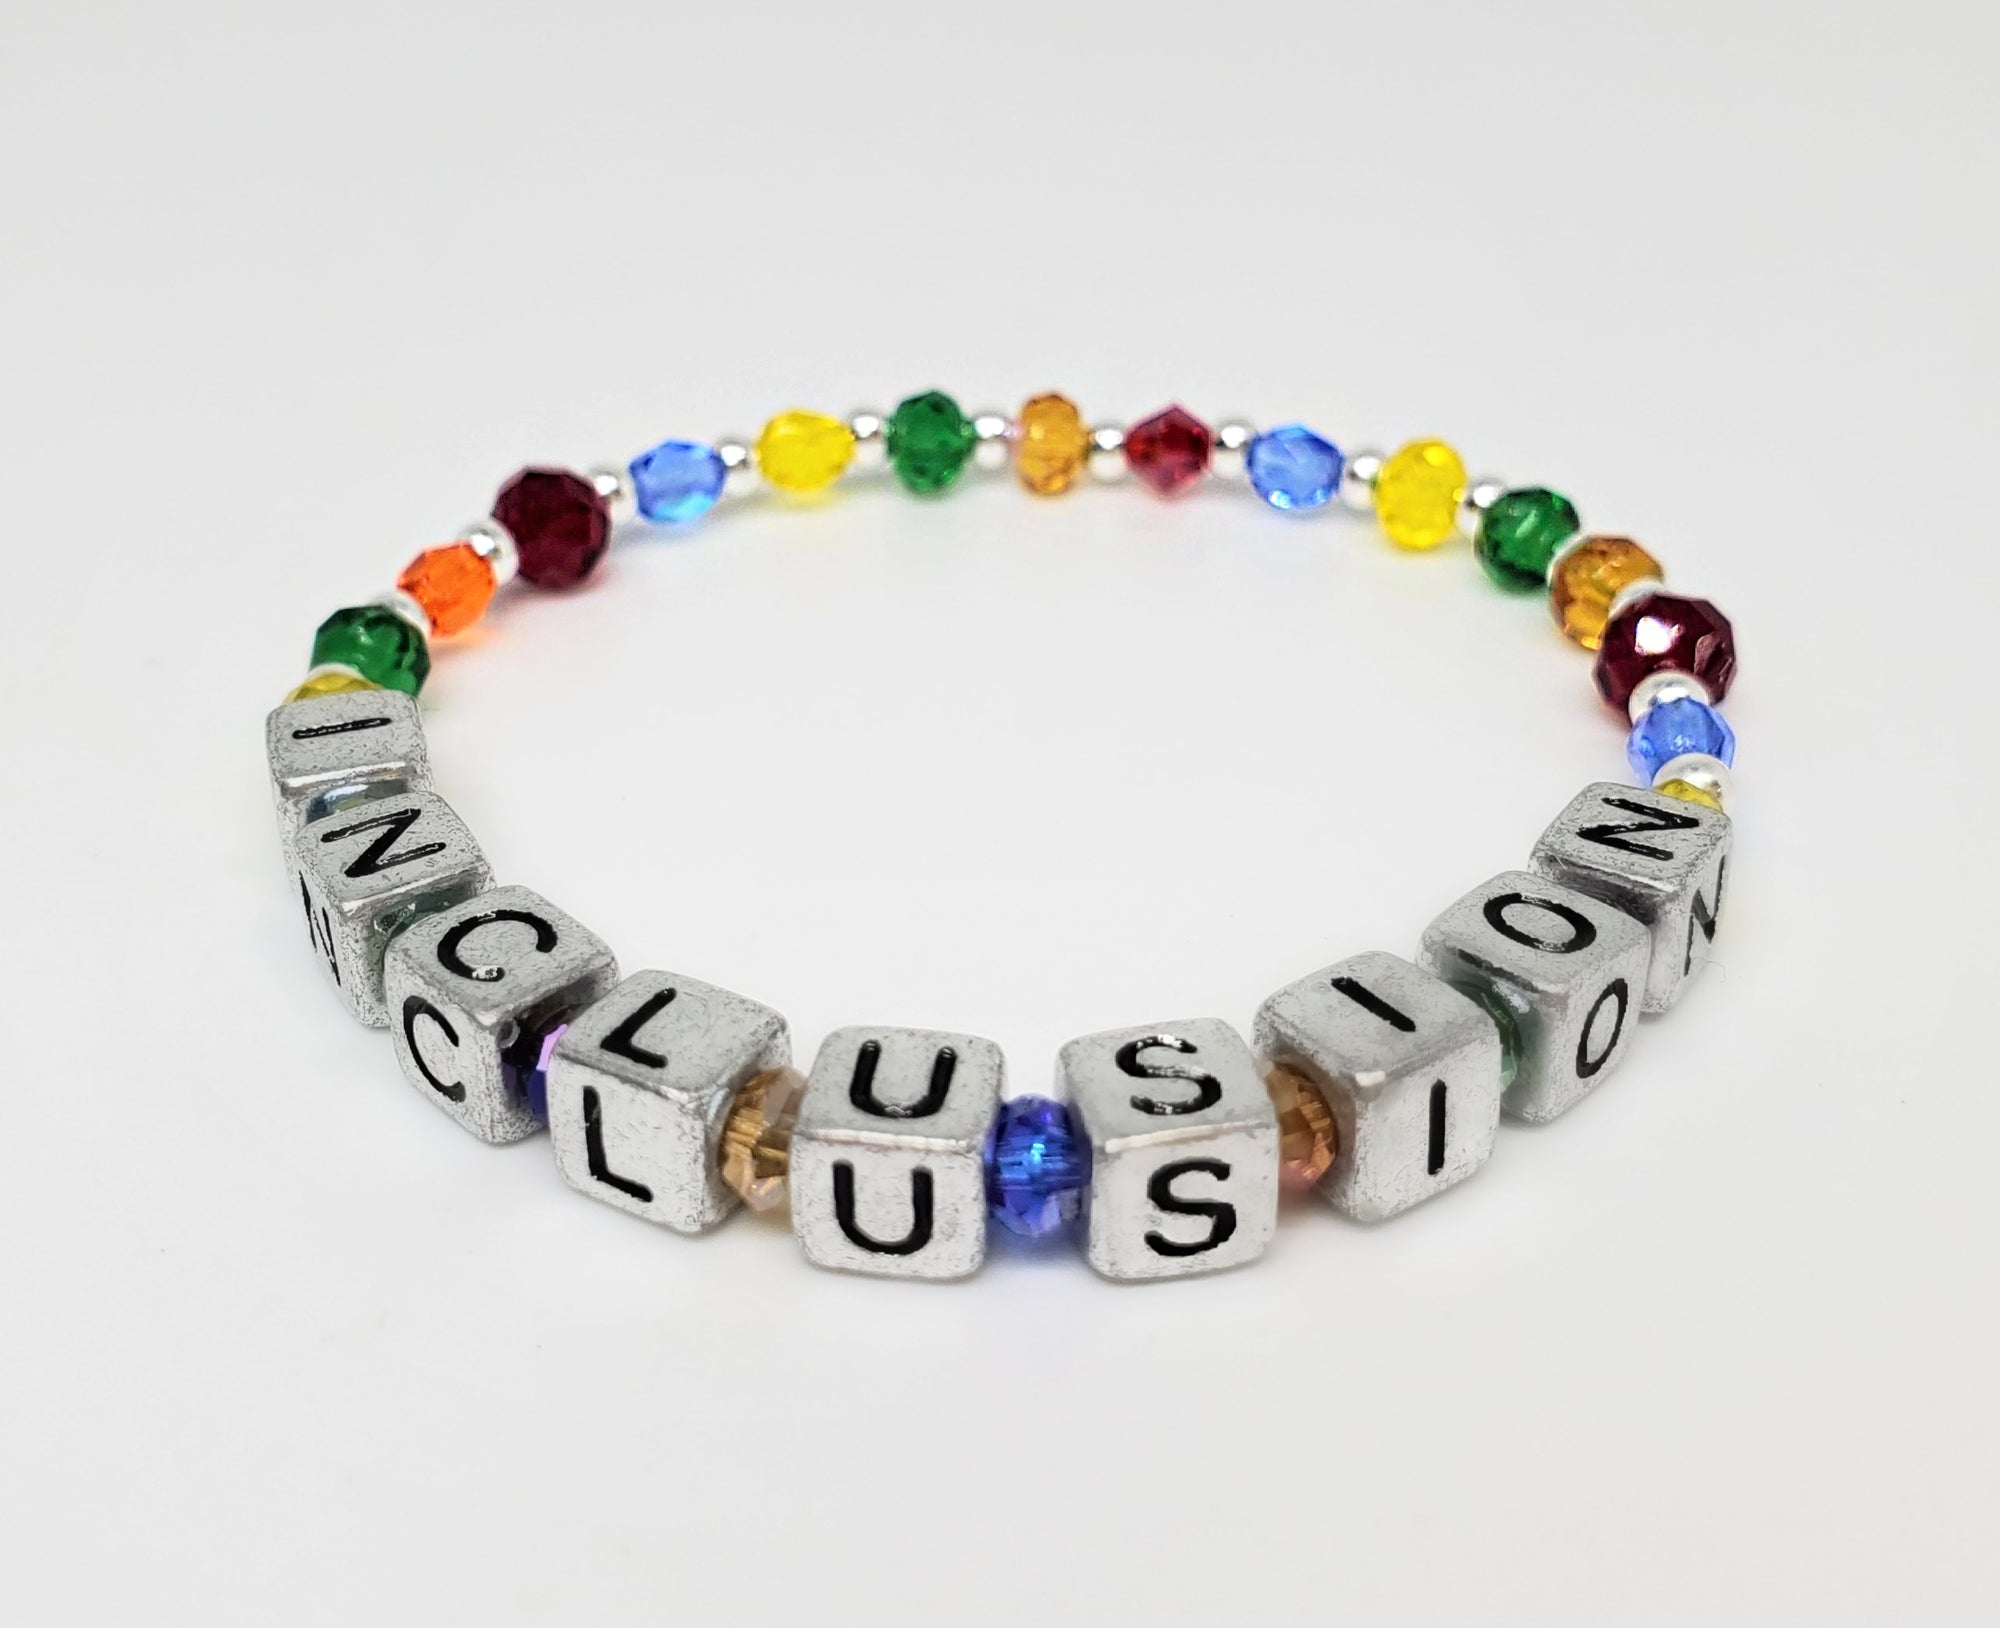 Inclusion Bracelet that make a great gift, Show your advocacy for INCLUSIVITY! Rainbow bracelet